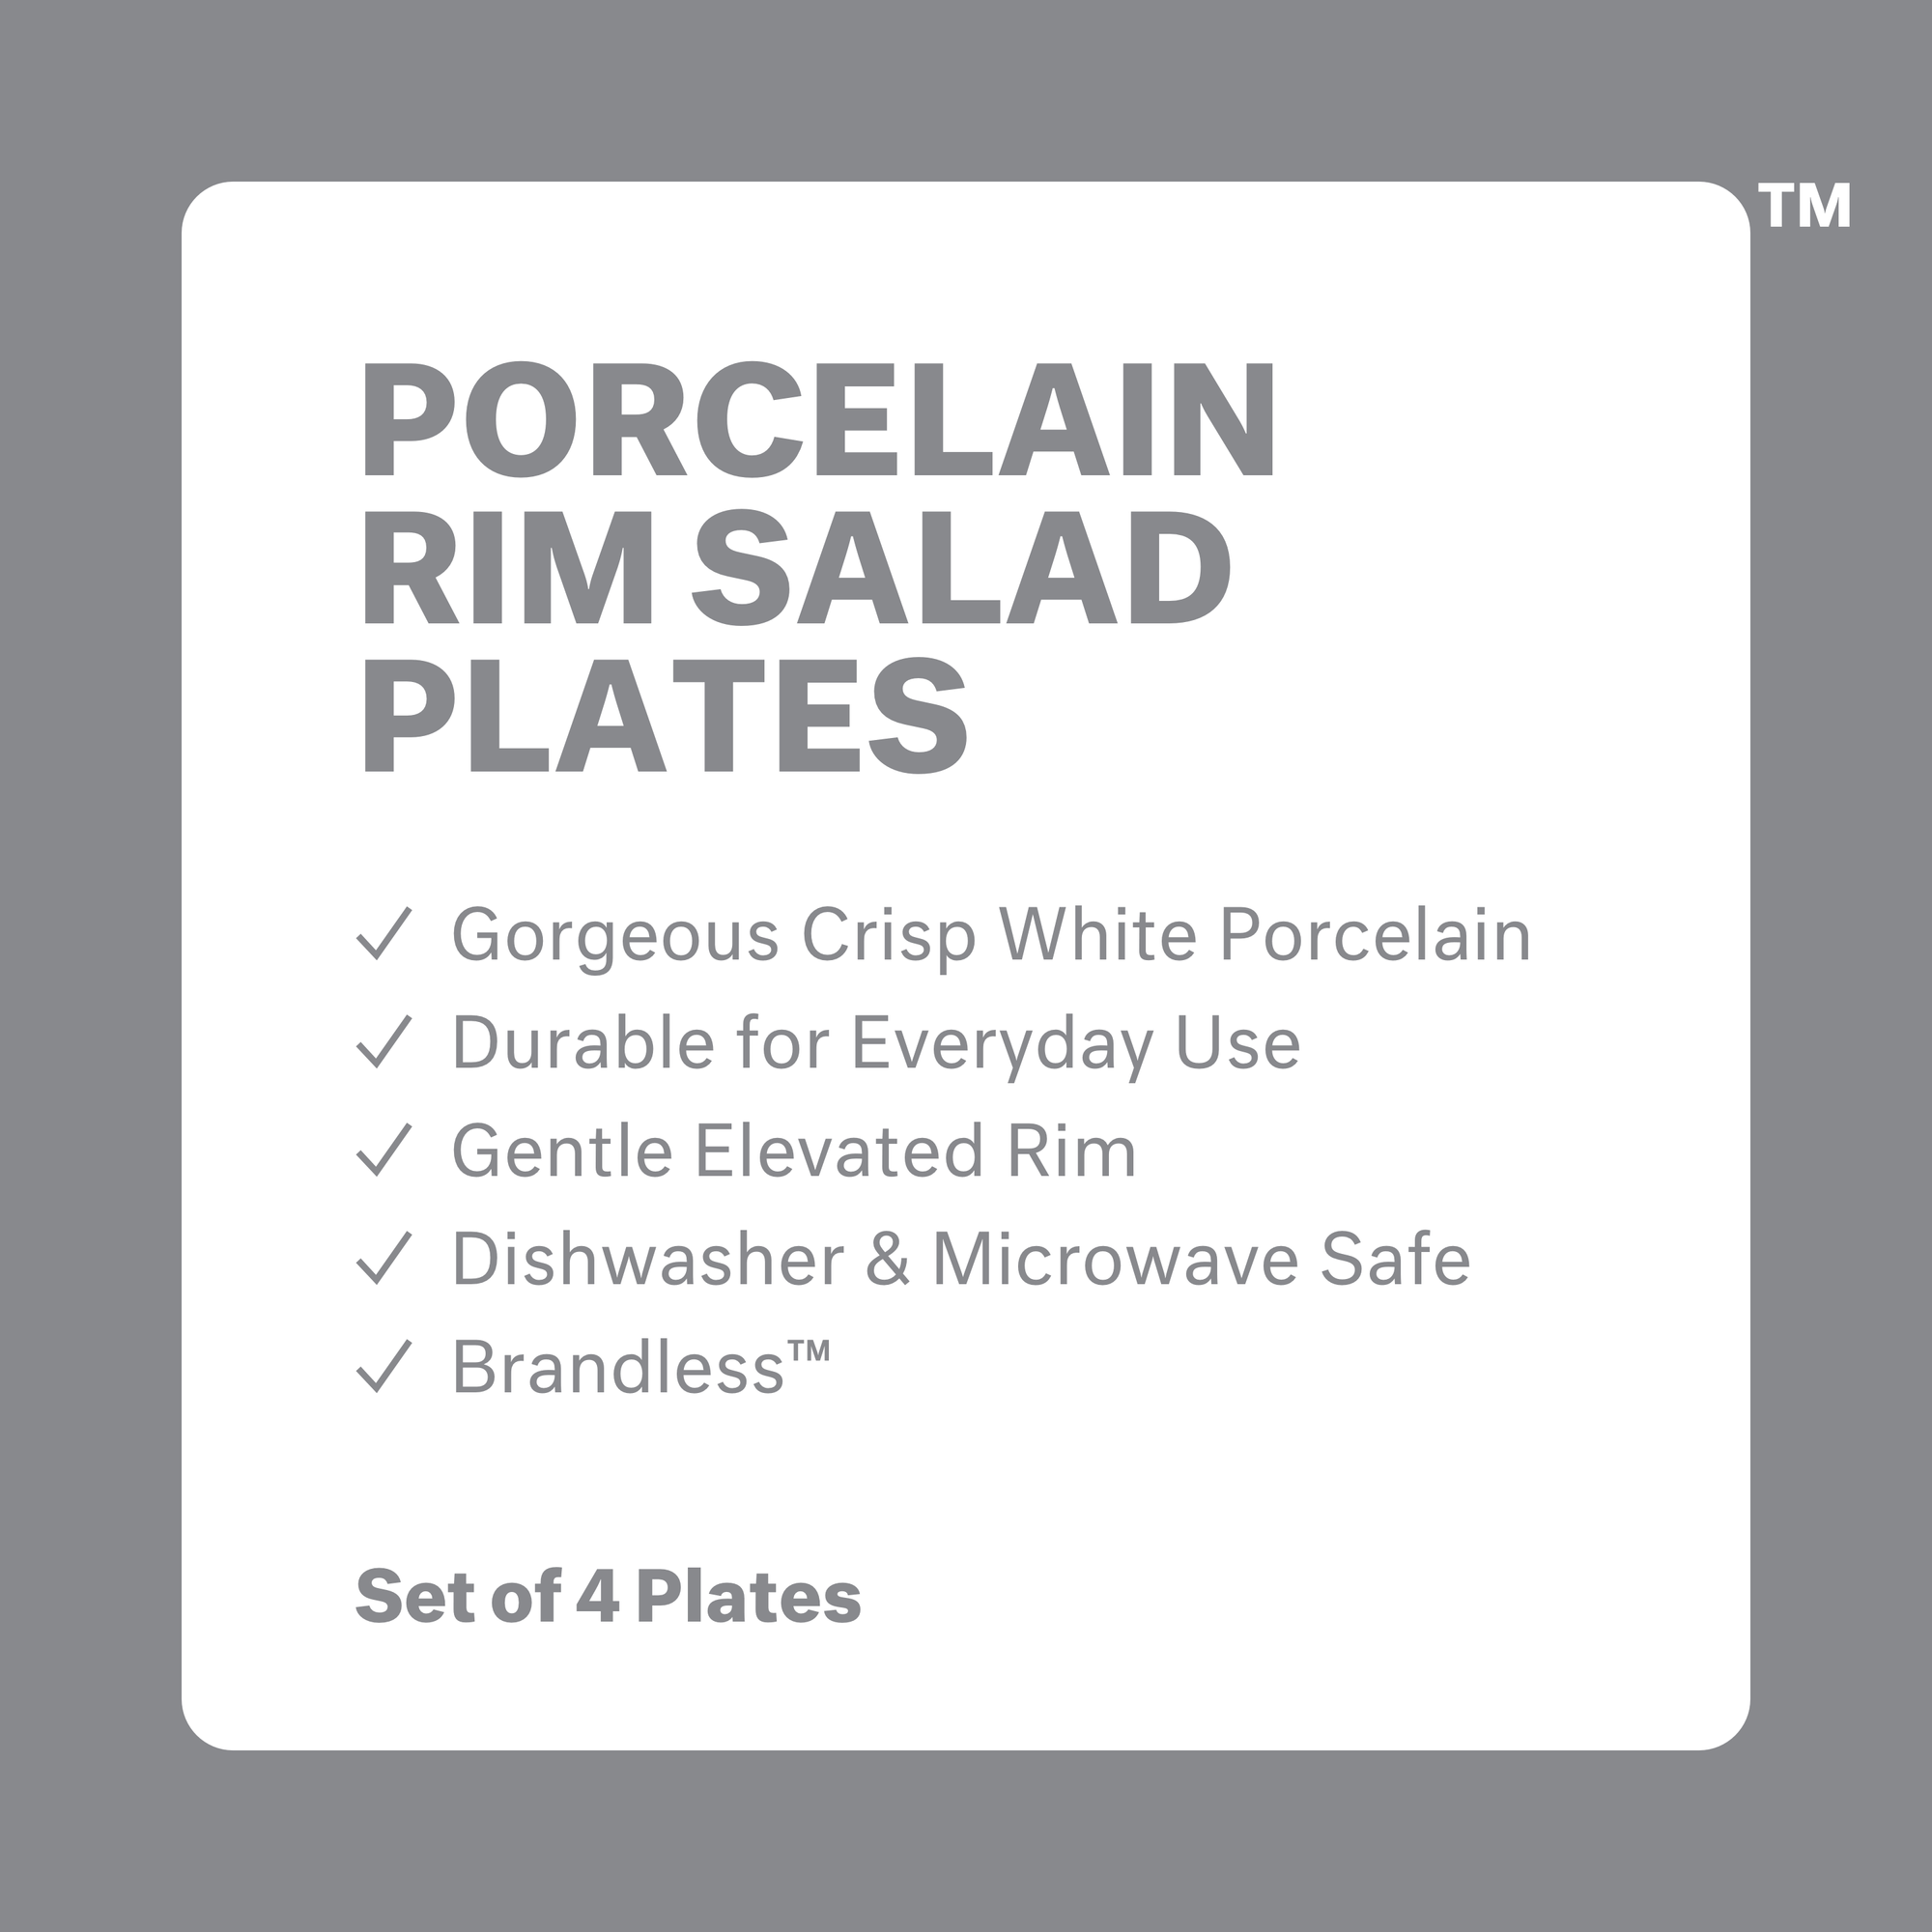 Buy 12 get 4 free! Front view, 4 sets of stacked salad plates and upright plates arranged in a square.